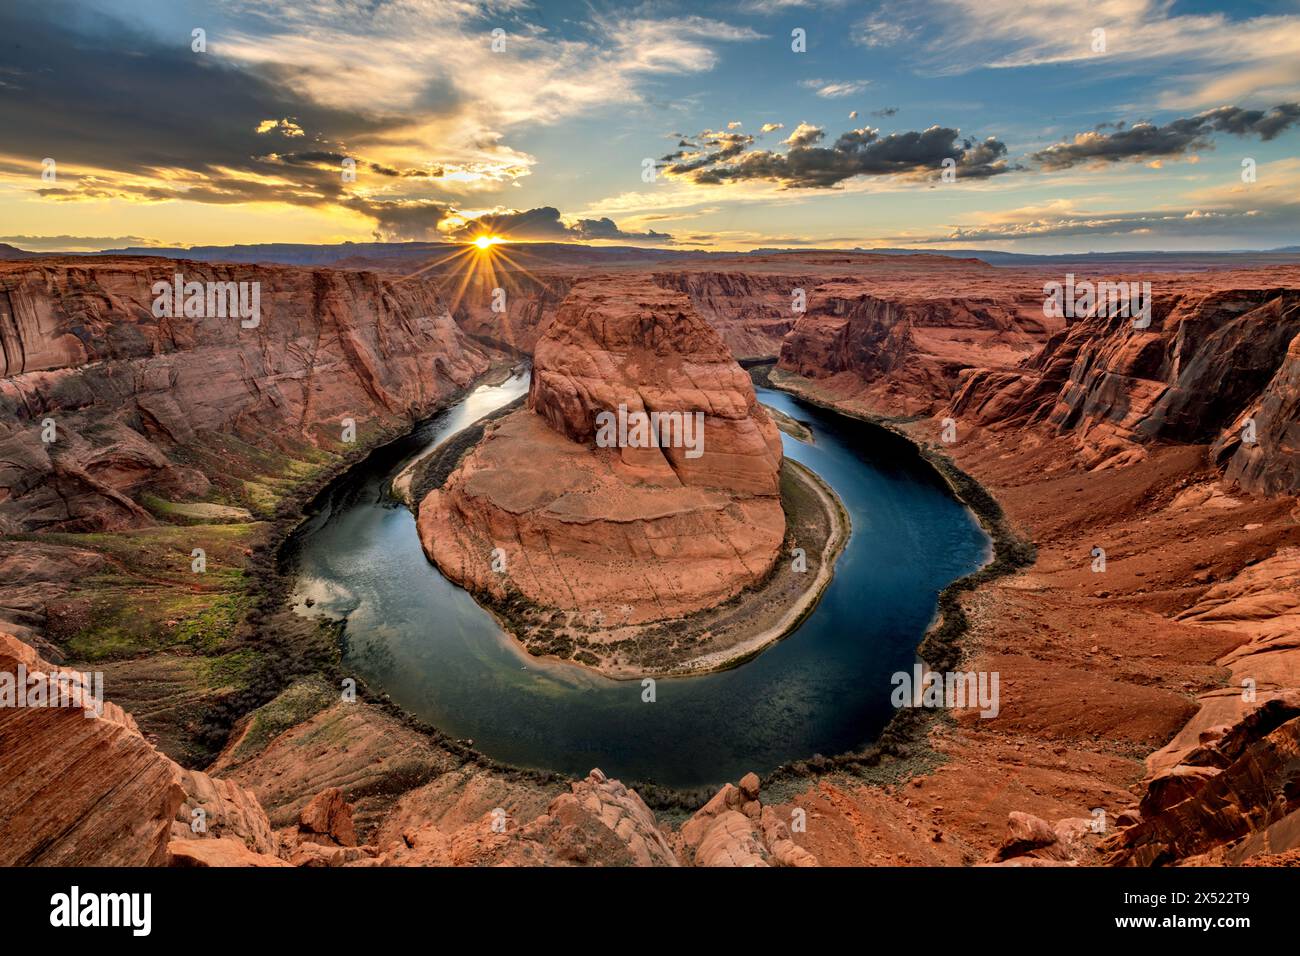 Super panorama of Horseshoe Bend in Page Arizona shows the pink inversion layer and the dramatic horseshoe shape from which the Colorado River flows. Stock Photo